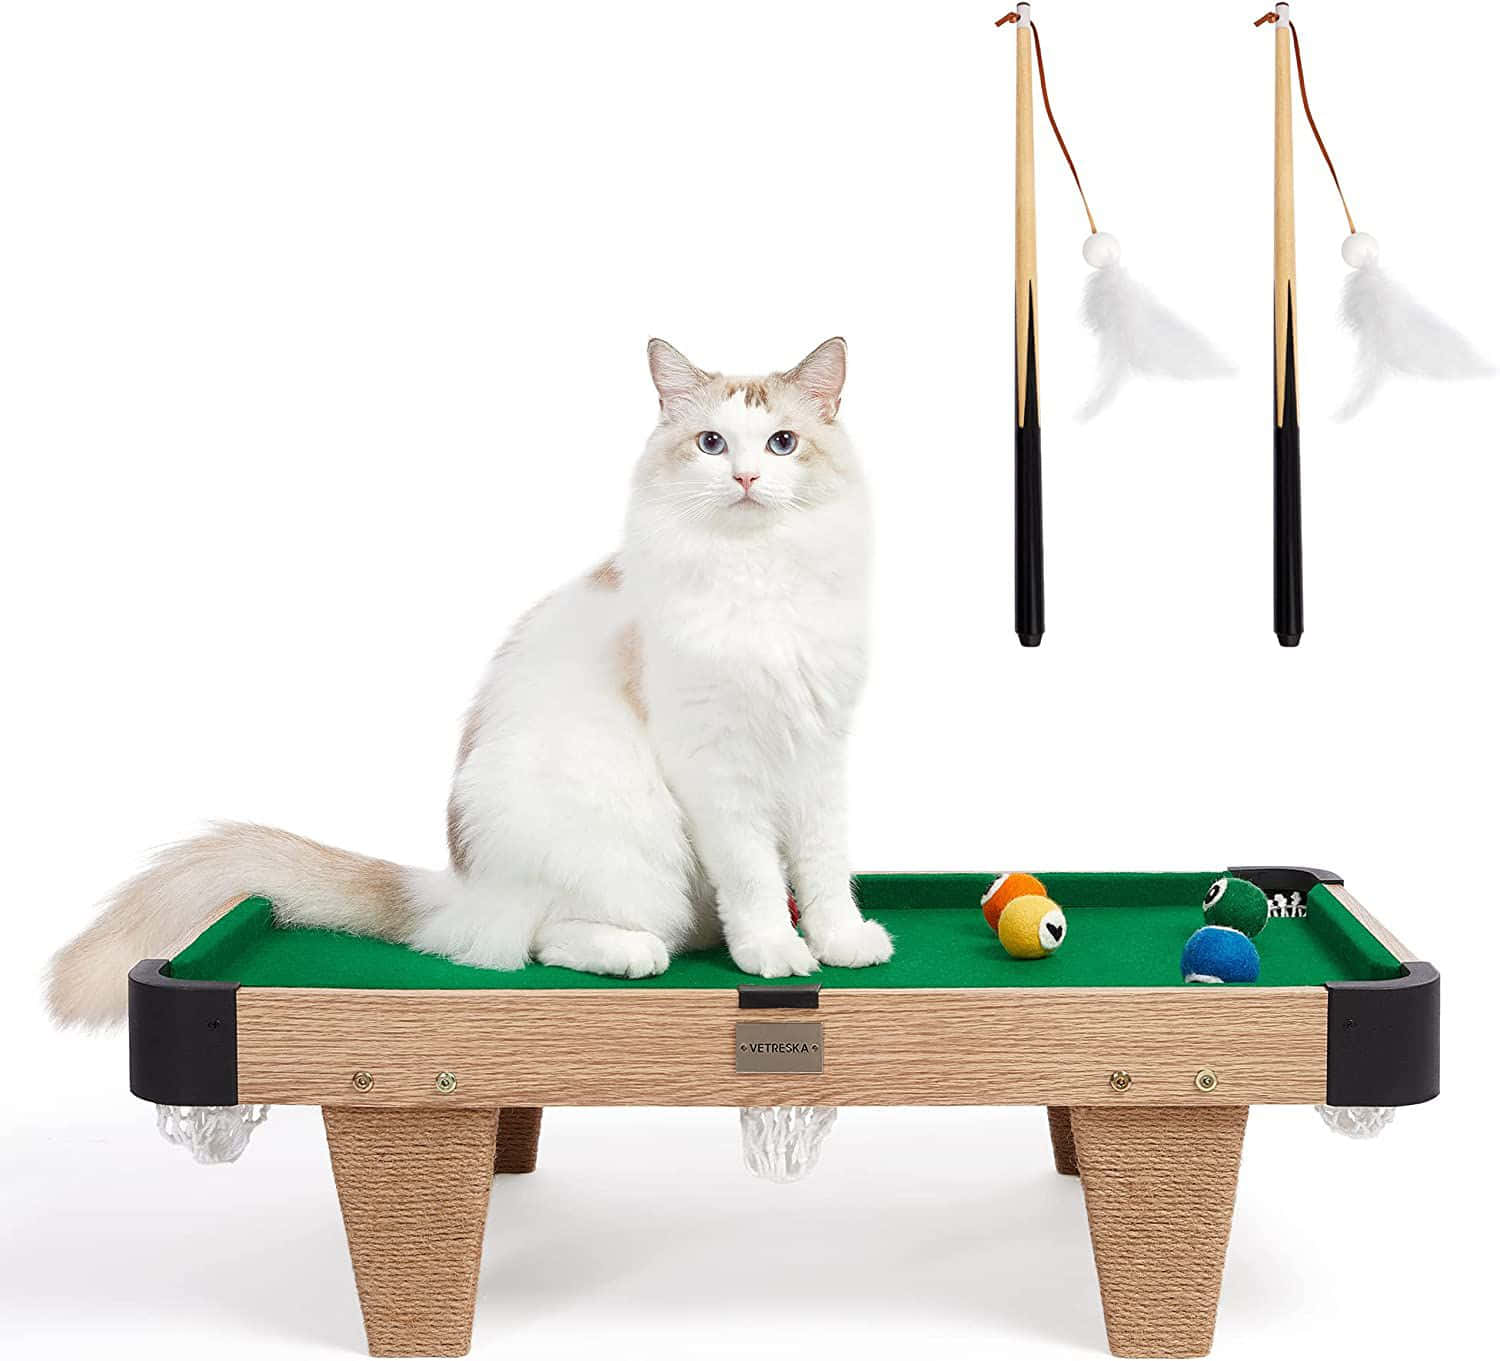 A Cat Sitting On A Pool Table With A Ball And A Stick